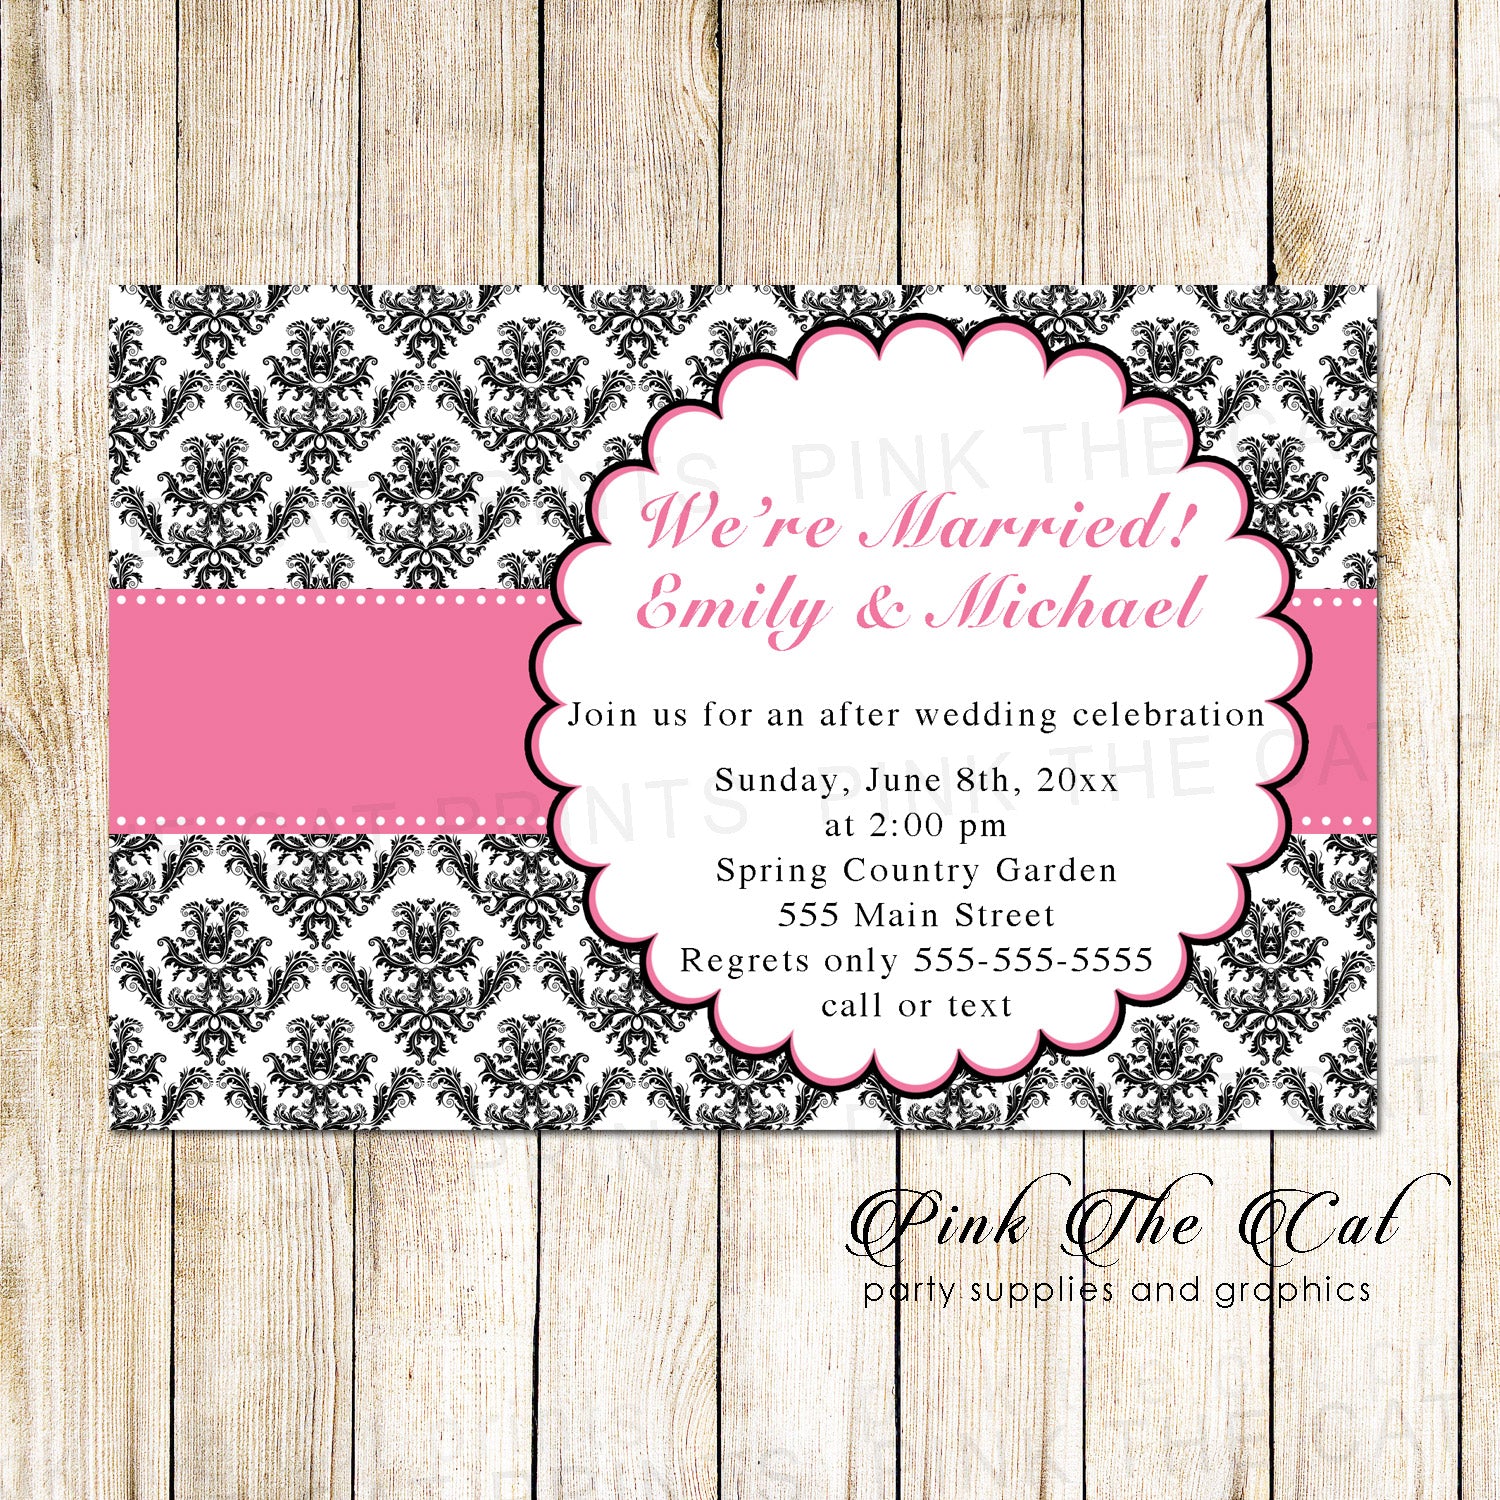 100 after wedding celebration invitations pink black cards personalized